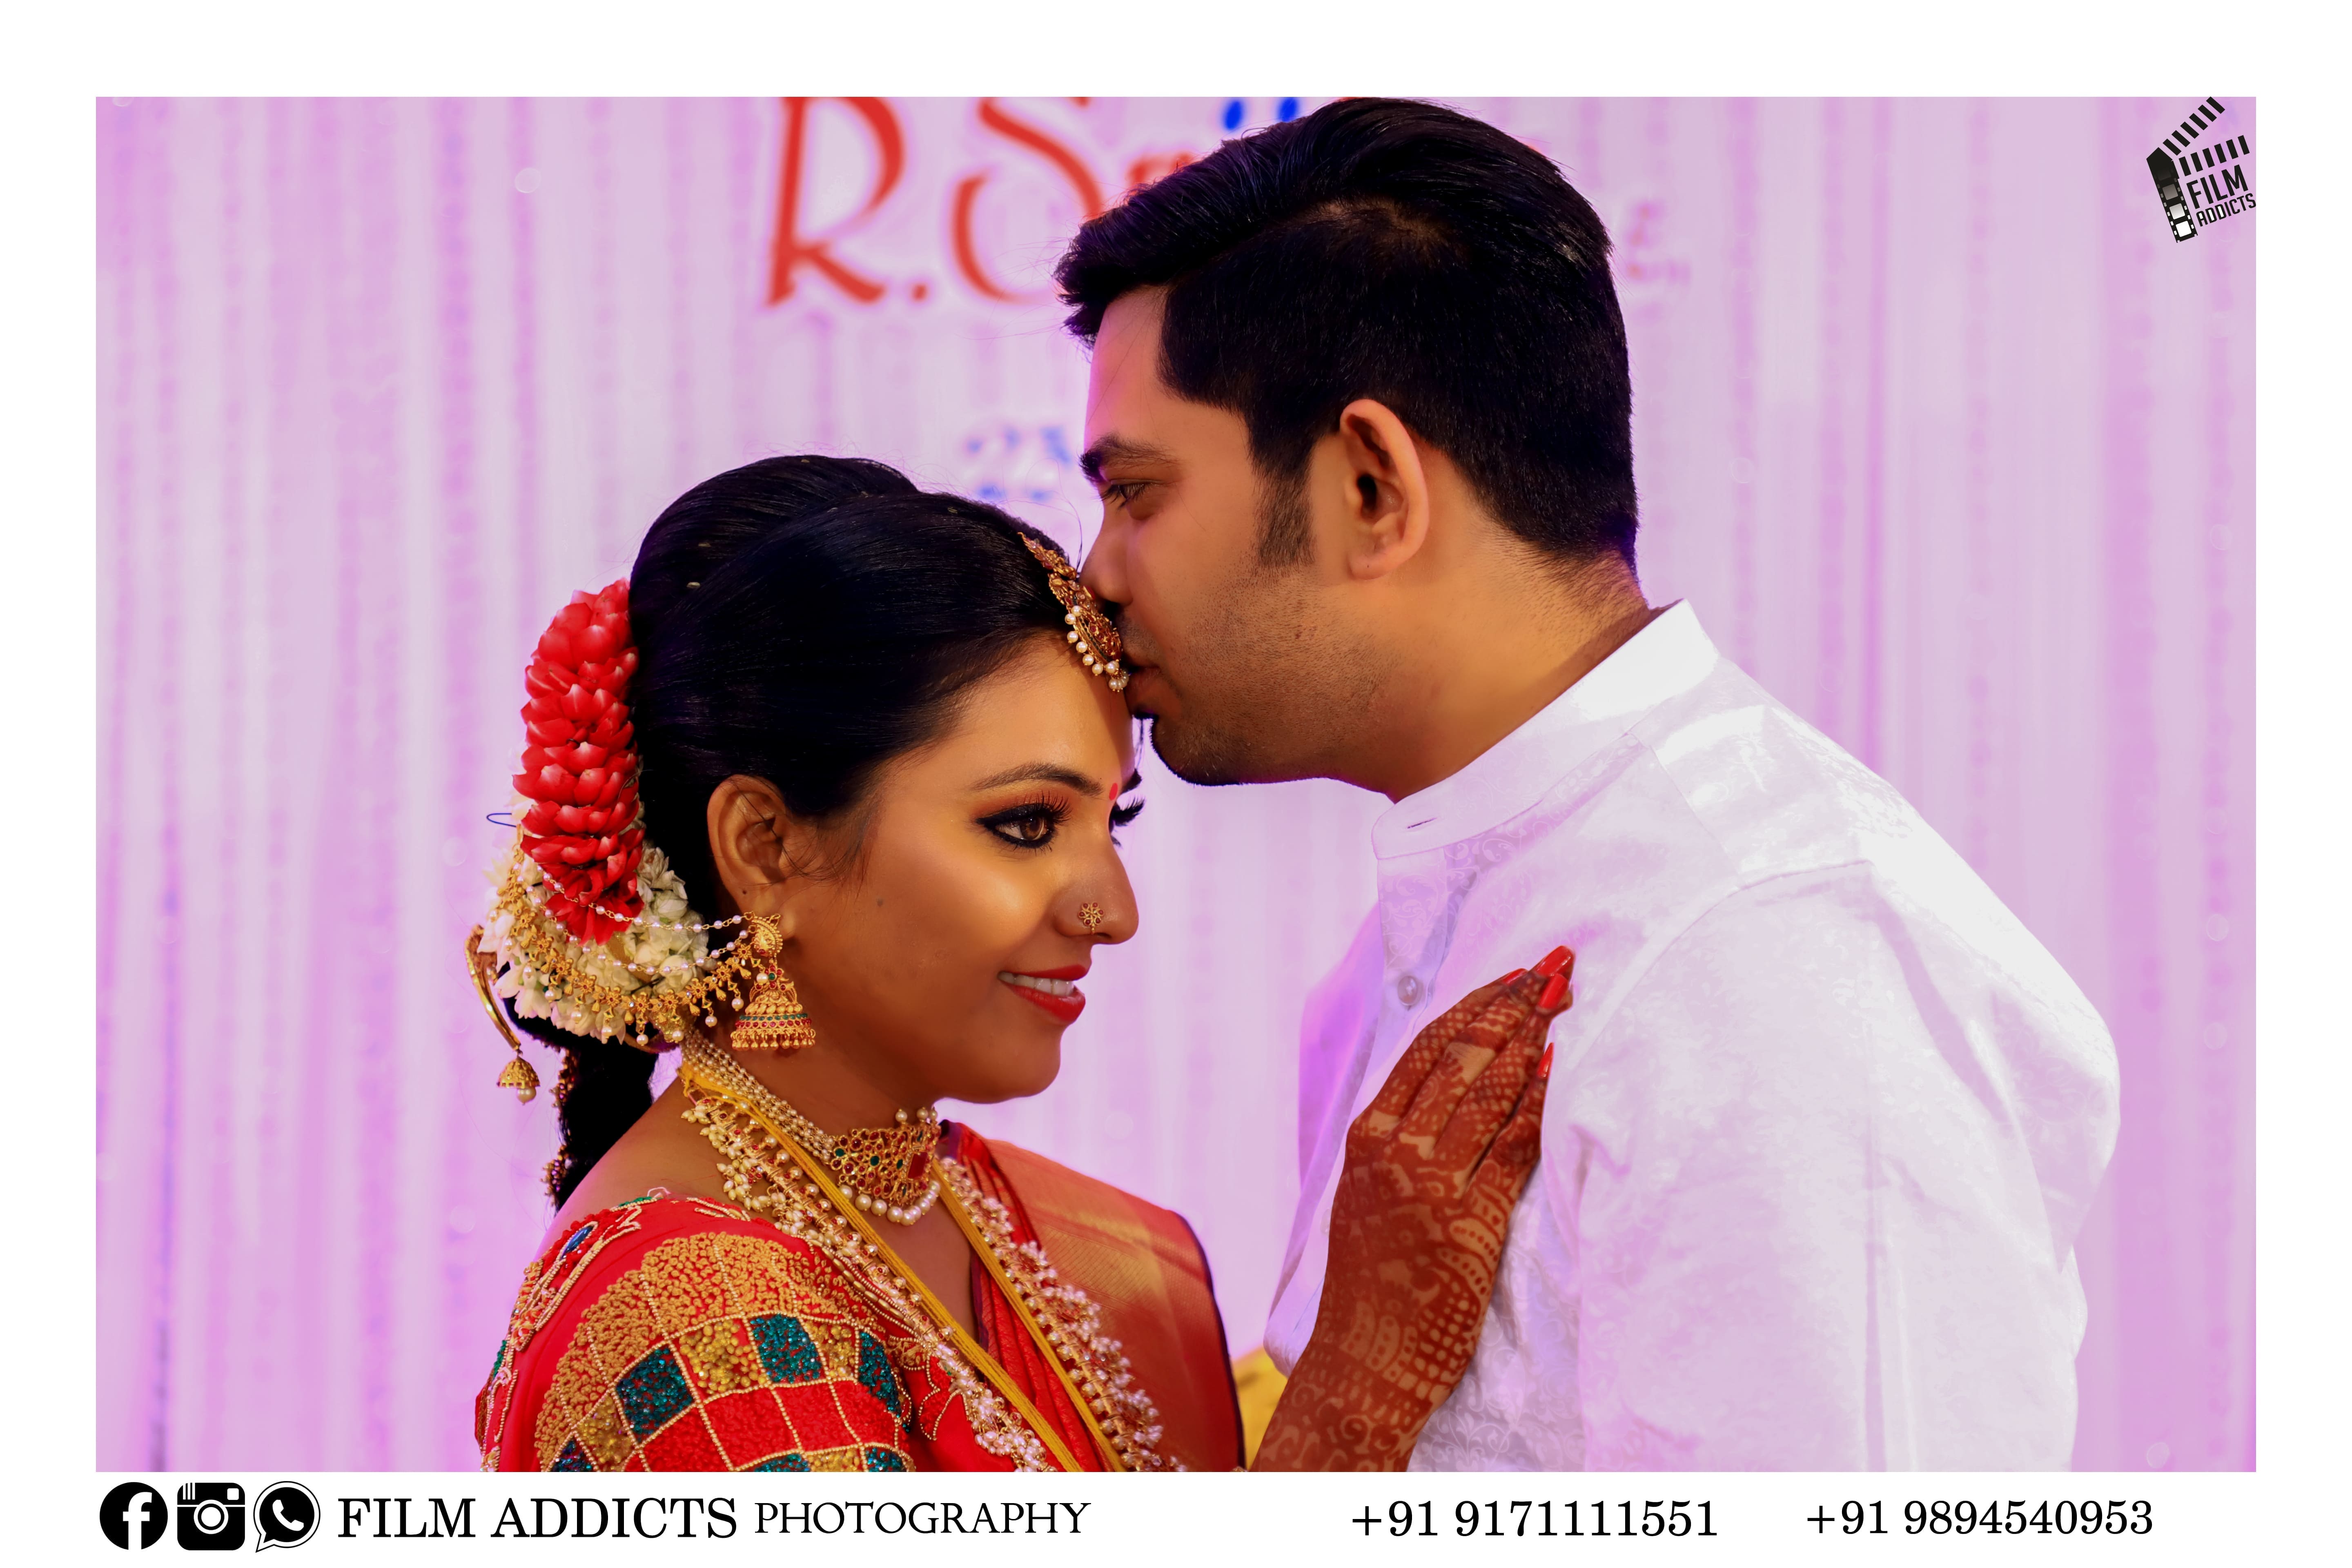 Best Candid Photograpers in Rajapalayam, Best candid Photographers in Rajapalayam, Best candid photographers in Rajapalayam, Best Wedding Candid photographers in Rajapalayam, Wedding Candid Moments, FilmAddicts, Photography, FilmAddictsPhotography, best wedding in Rajapalayam, Best Candid shoot in Rajapalayam, best moment, Best wedding moments, Best wedding photography in Rajapalayam, Best wedding videography in Rajapalayam, Best couple shoot, Best candid, Best wedding shoot, Best wedding candid, best marraige photographers in Rajapalayam, best marraige photography in Rajapalayam, best candid photography, best Rajapalayam photography, Rajapalayam, Rajapalayam photography, Rajapalayam couples, candid shoot, candid, tamilnadu wedding photography, best photographers in Rajapalayam, Best Candid Photograpers in Virudhunagar, Best Wedding Photographers in Virudhunagar, Best candid photographers in Virudhunagar, Best Wedding Candid photographers in Virudhunagar, Wedding Candid Moments, FilmAddicts, Photography, FilmAddictsPhotography, best wedding in Virudhunagar, Best Candid shoot in Virudhunagar, best moment, Best wedding moments, Best wedding photography in Virudhunagar, Best wedding videography in Virudhunagar, Best couple shoot, Best candid, Best wedding shoot, Best wedding candid, best marraige photographers in Virudhunagar, best marraige photography in Virudhunagar, best candid photography, best Virudhunagar photography, Virudhunagar, Virudhunagar photography, Virudhunagar couples, candid shoot, candid, tamilnadu wedding photography, best photographers in Virudhunagar, tamilnadu